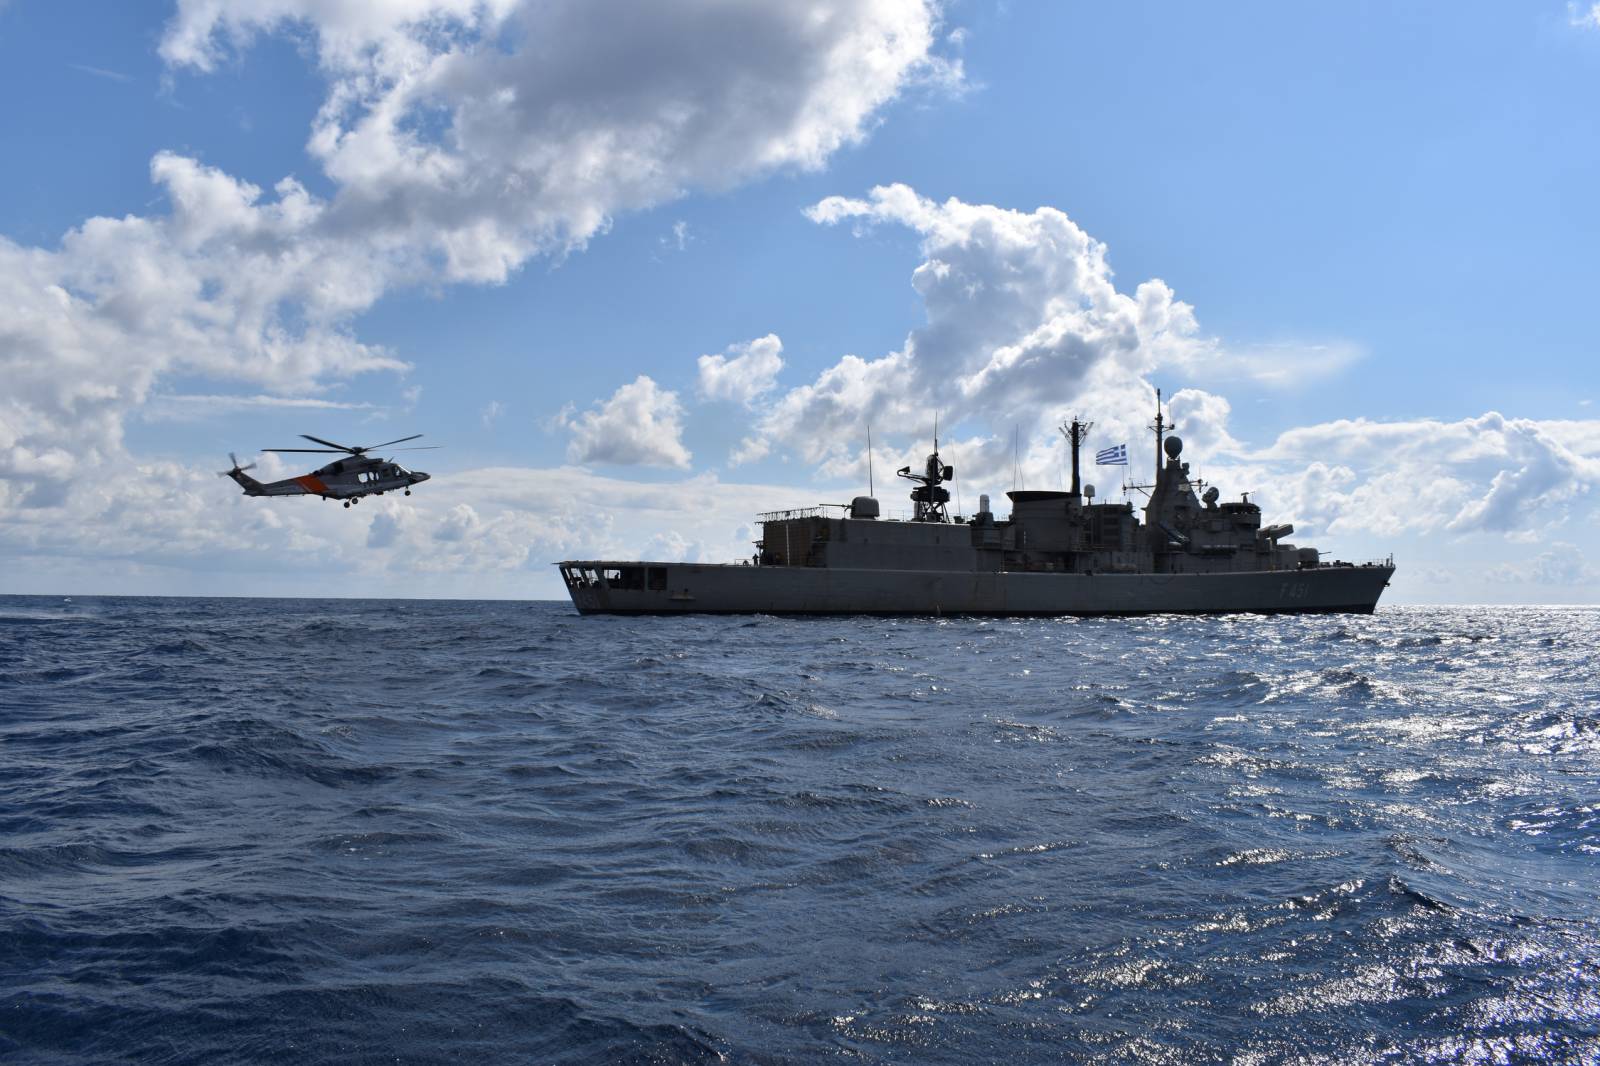 Joint Search and Rescue Exercise between Cyprus and Greece
